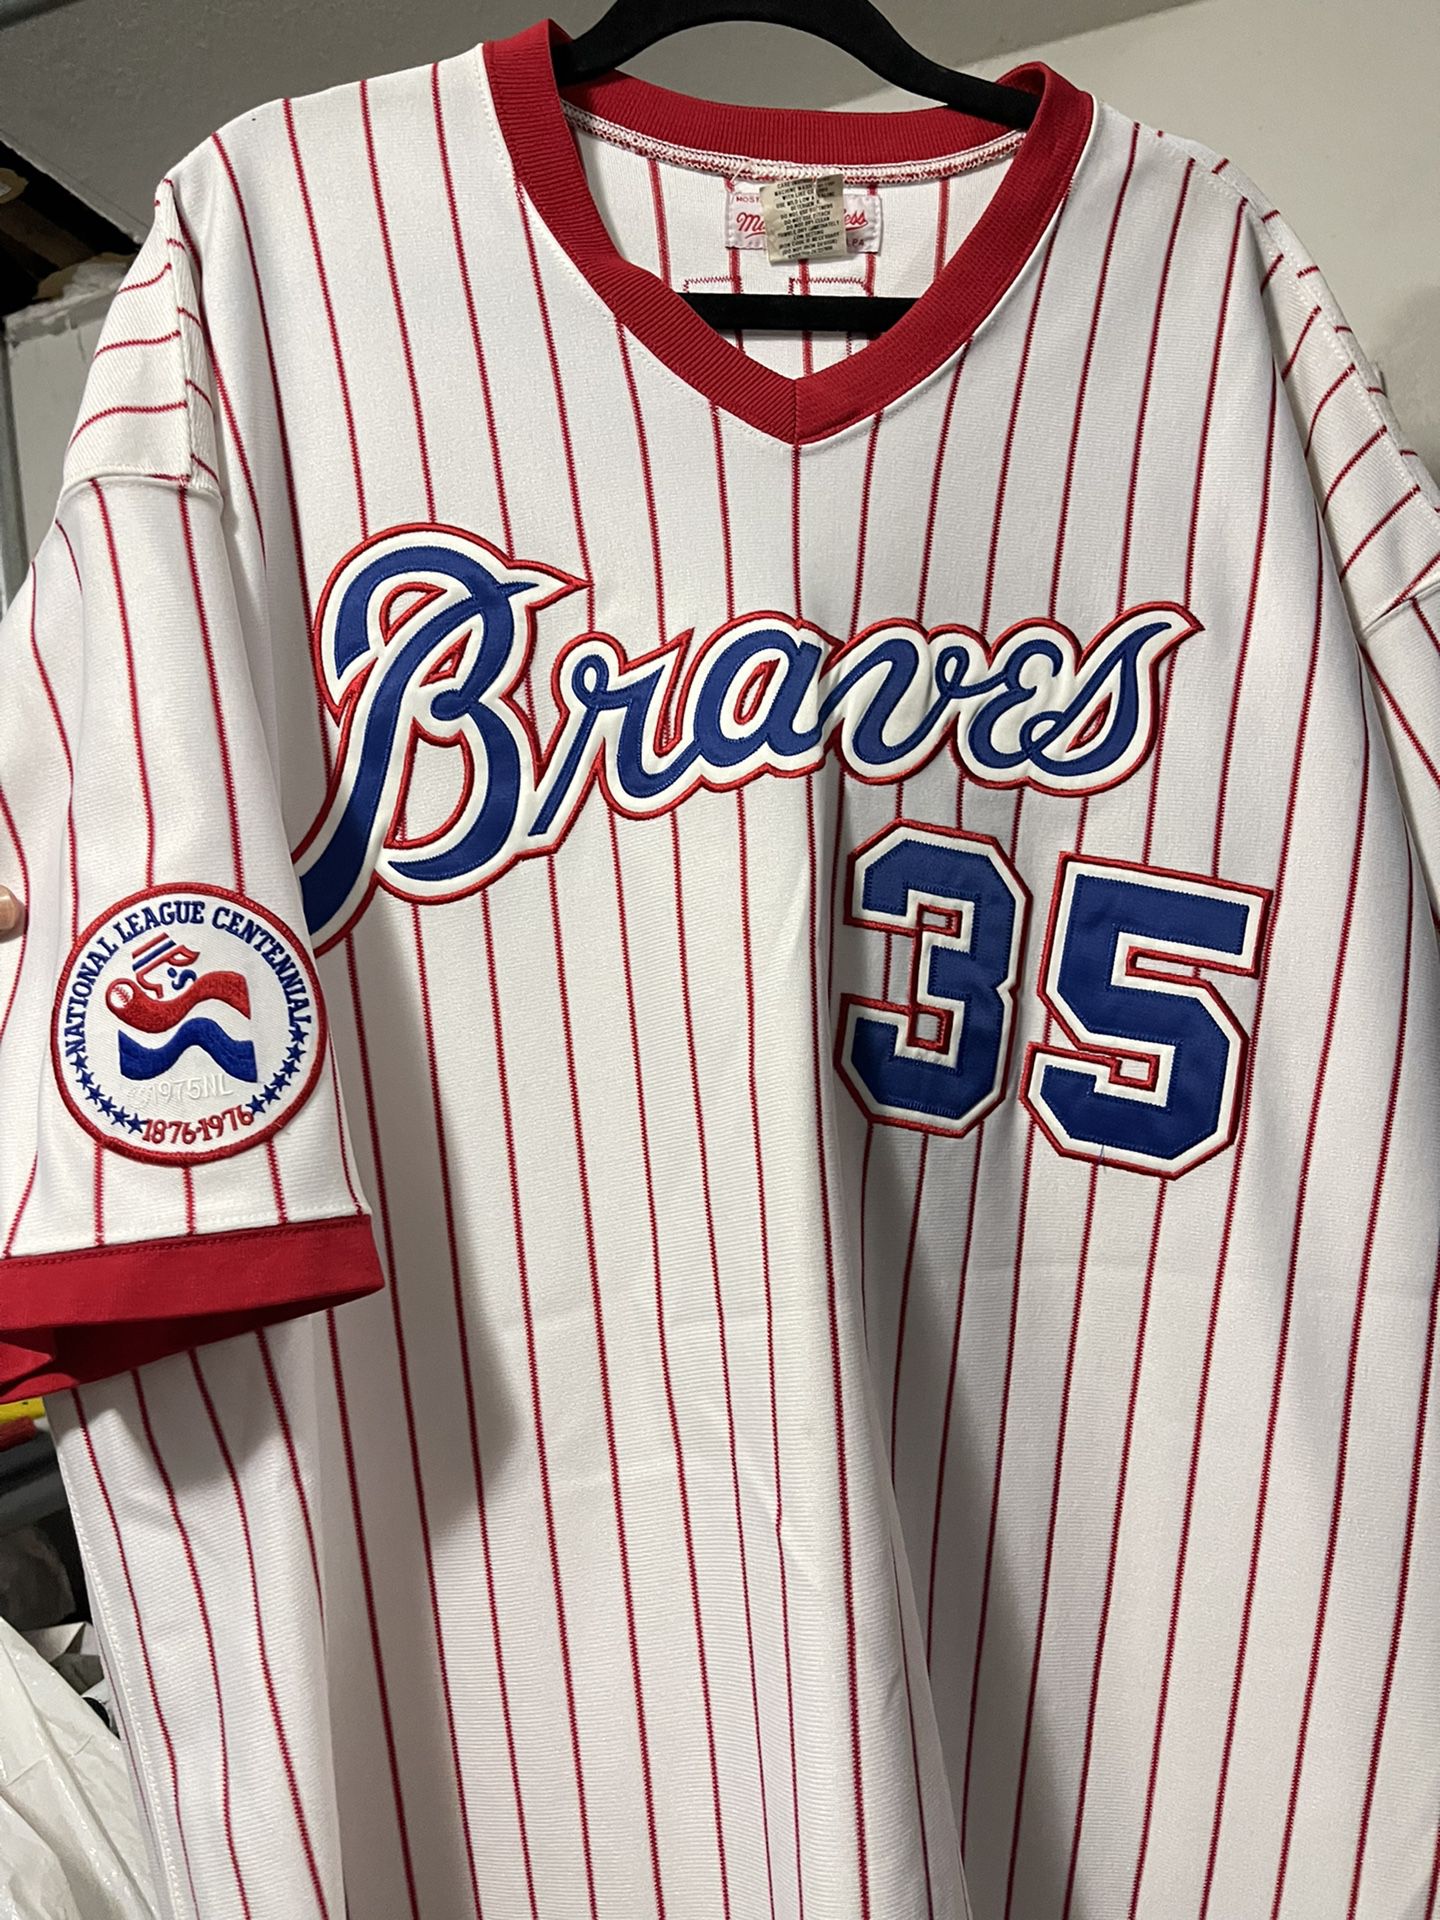 Phil Knucksie Niekro #35 Atlanta Braves 1976 Home Mitchell & Ness Throwback Jersey  for Sale in Los Angeles, CA - OfferUp